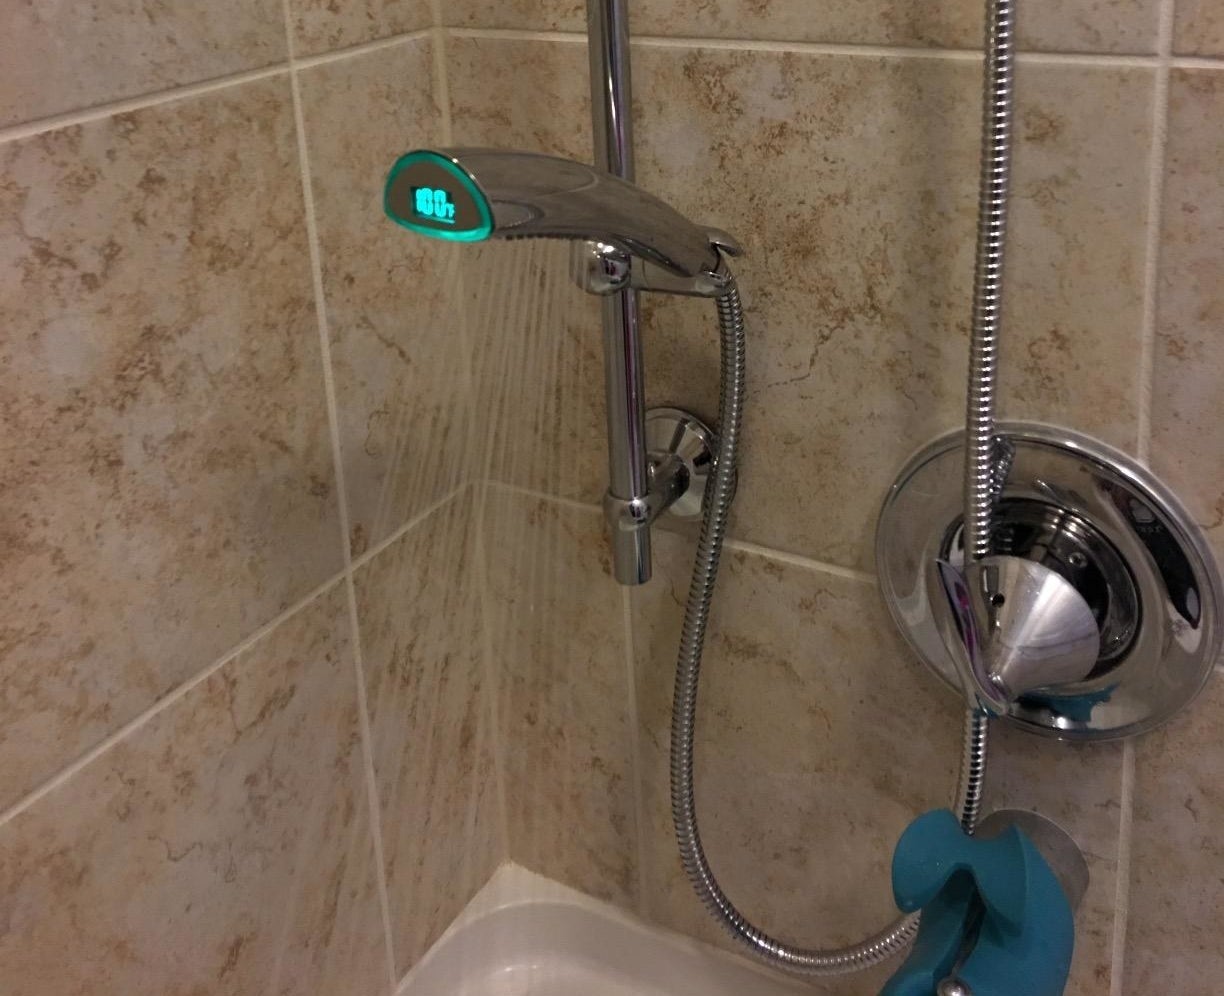 The shower head in use with the temperature displayed